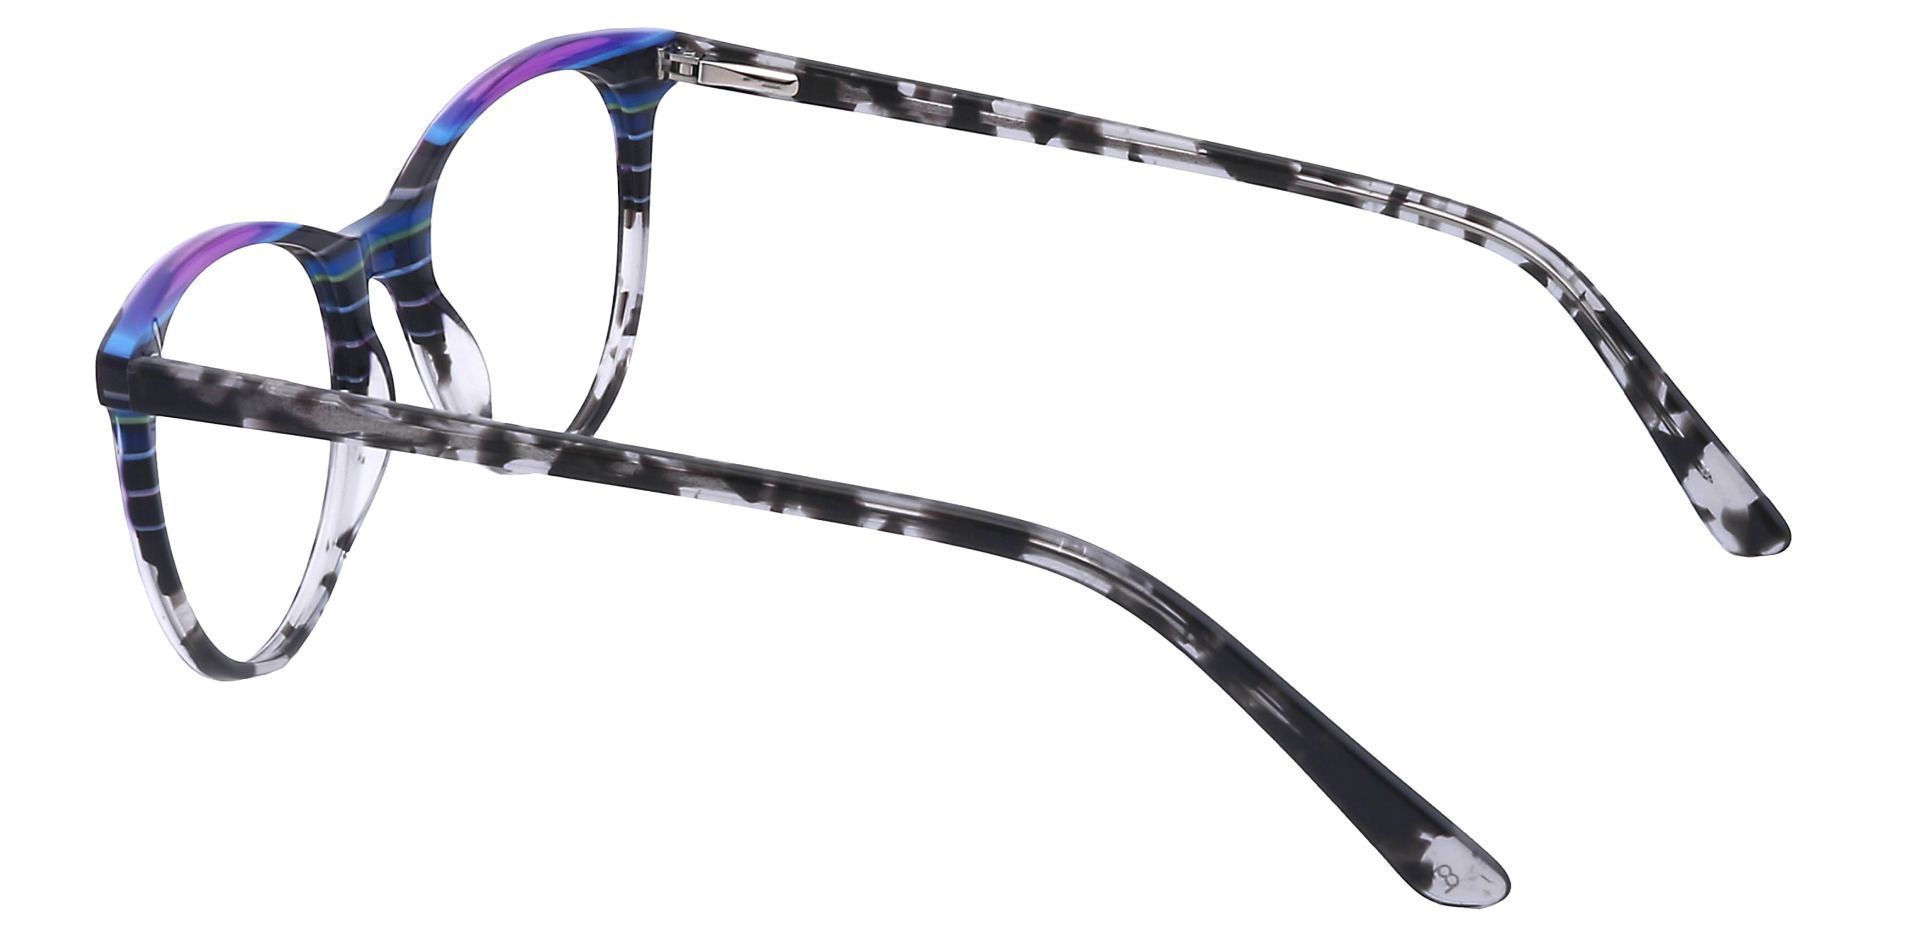 Patagonia Oval Lined Bifocal Glasses - Multicolored Blue Stripes  Multicolor